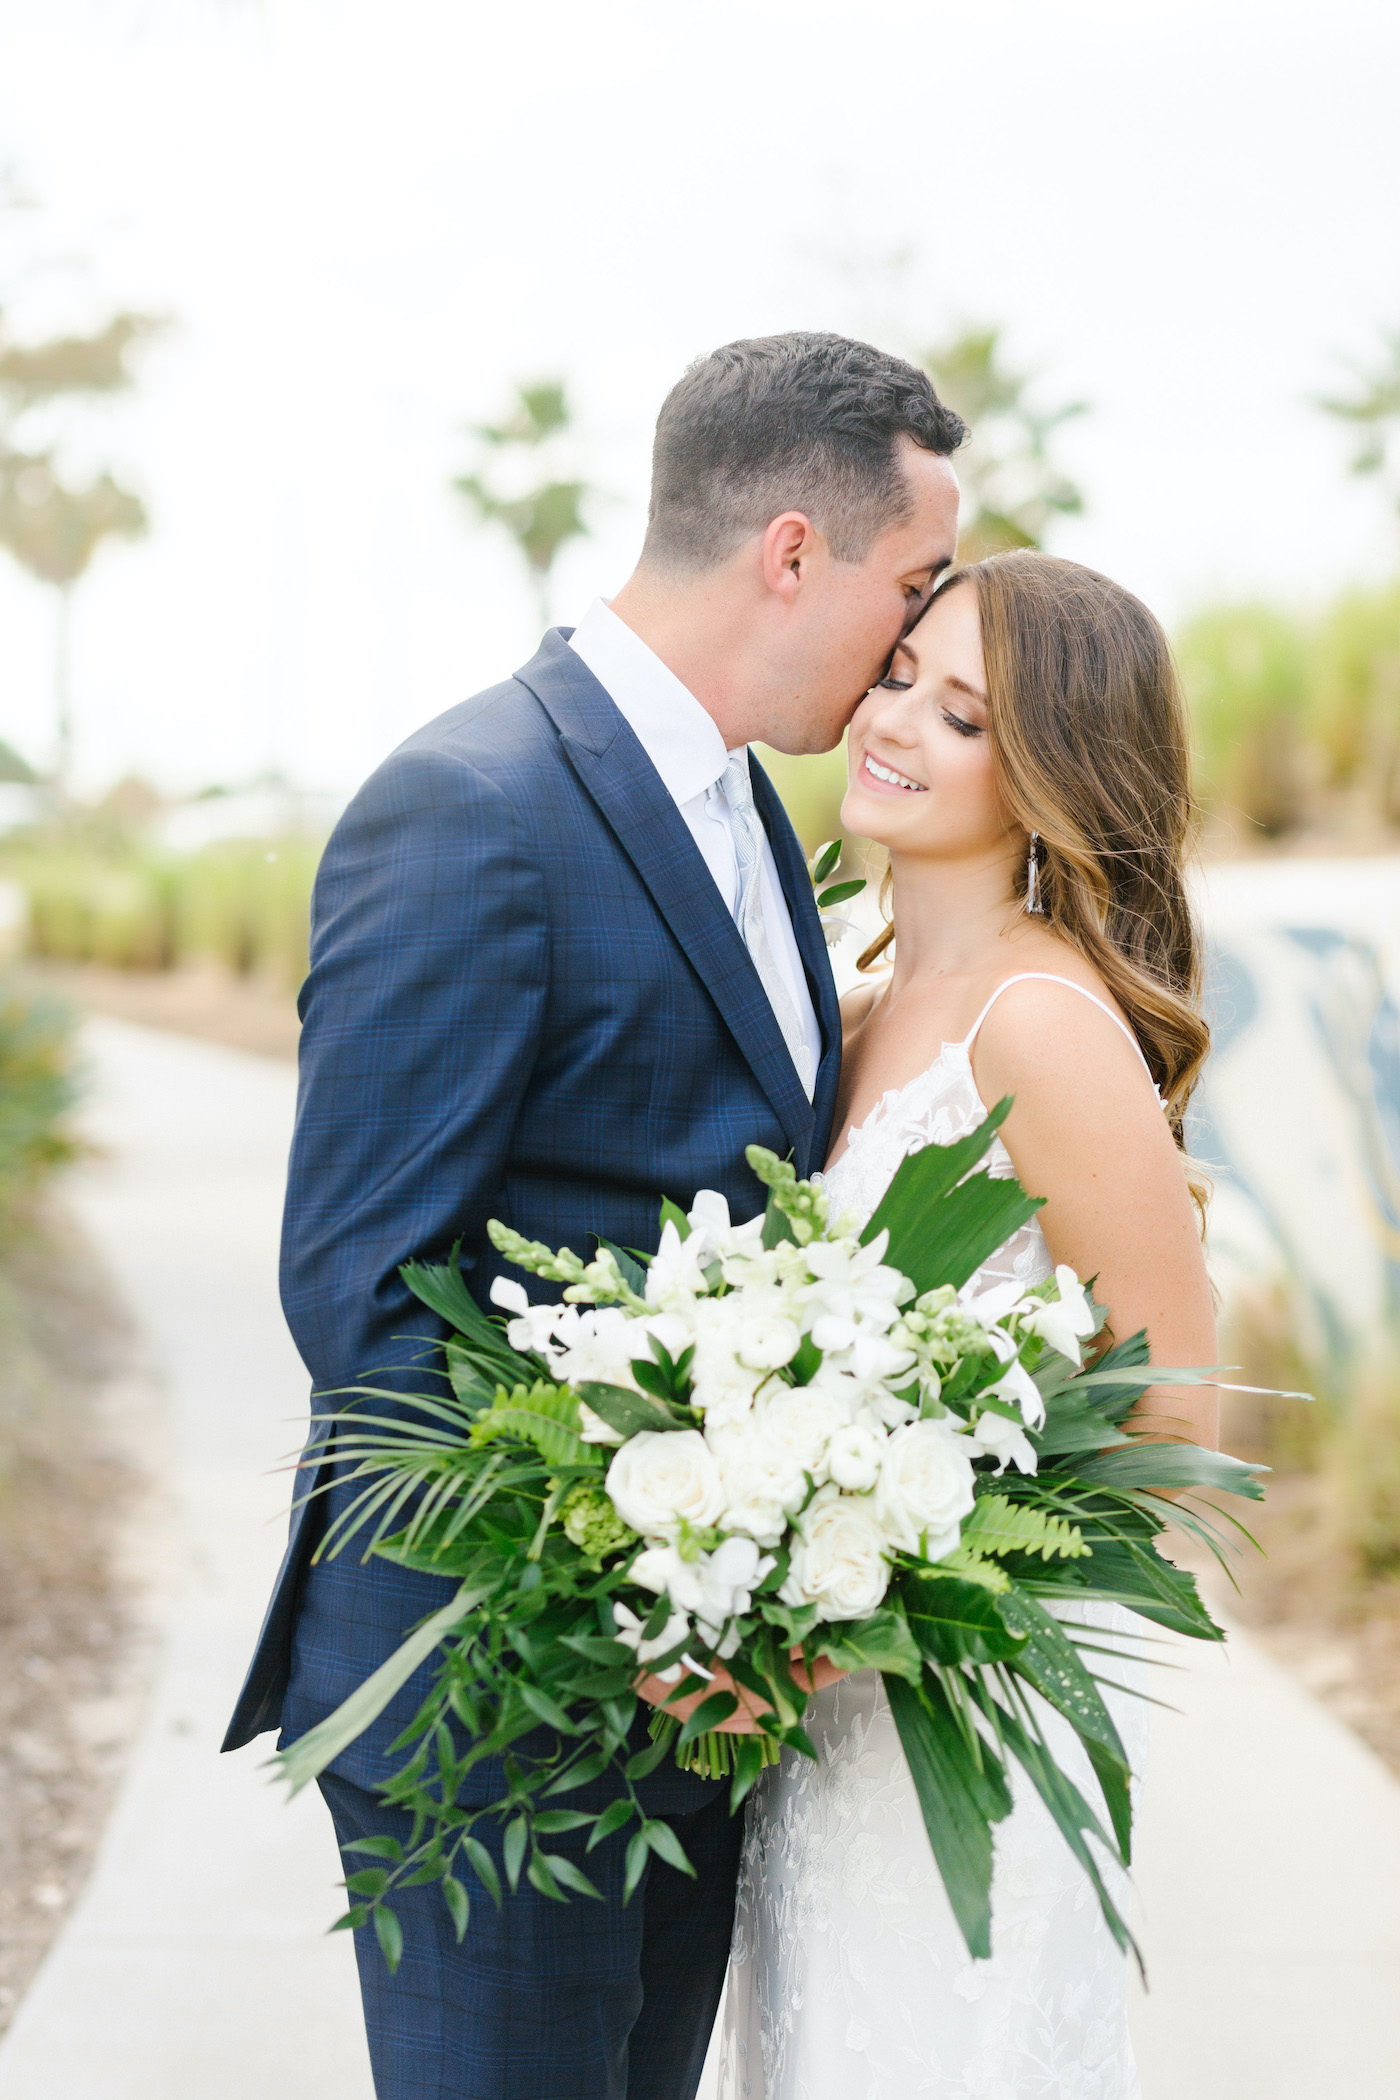 Bride and Groom Outdoor Portrait | Tampa Wedding Florist Bruce Wayne Florals | Florida Tropical Wedding Bridal Bouquet with Greenery Palm Fronds and Ferns and White Roses Orchids and Snapdragons | Groom in Classic Navy Blue Suit